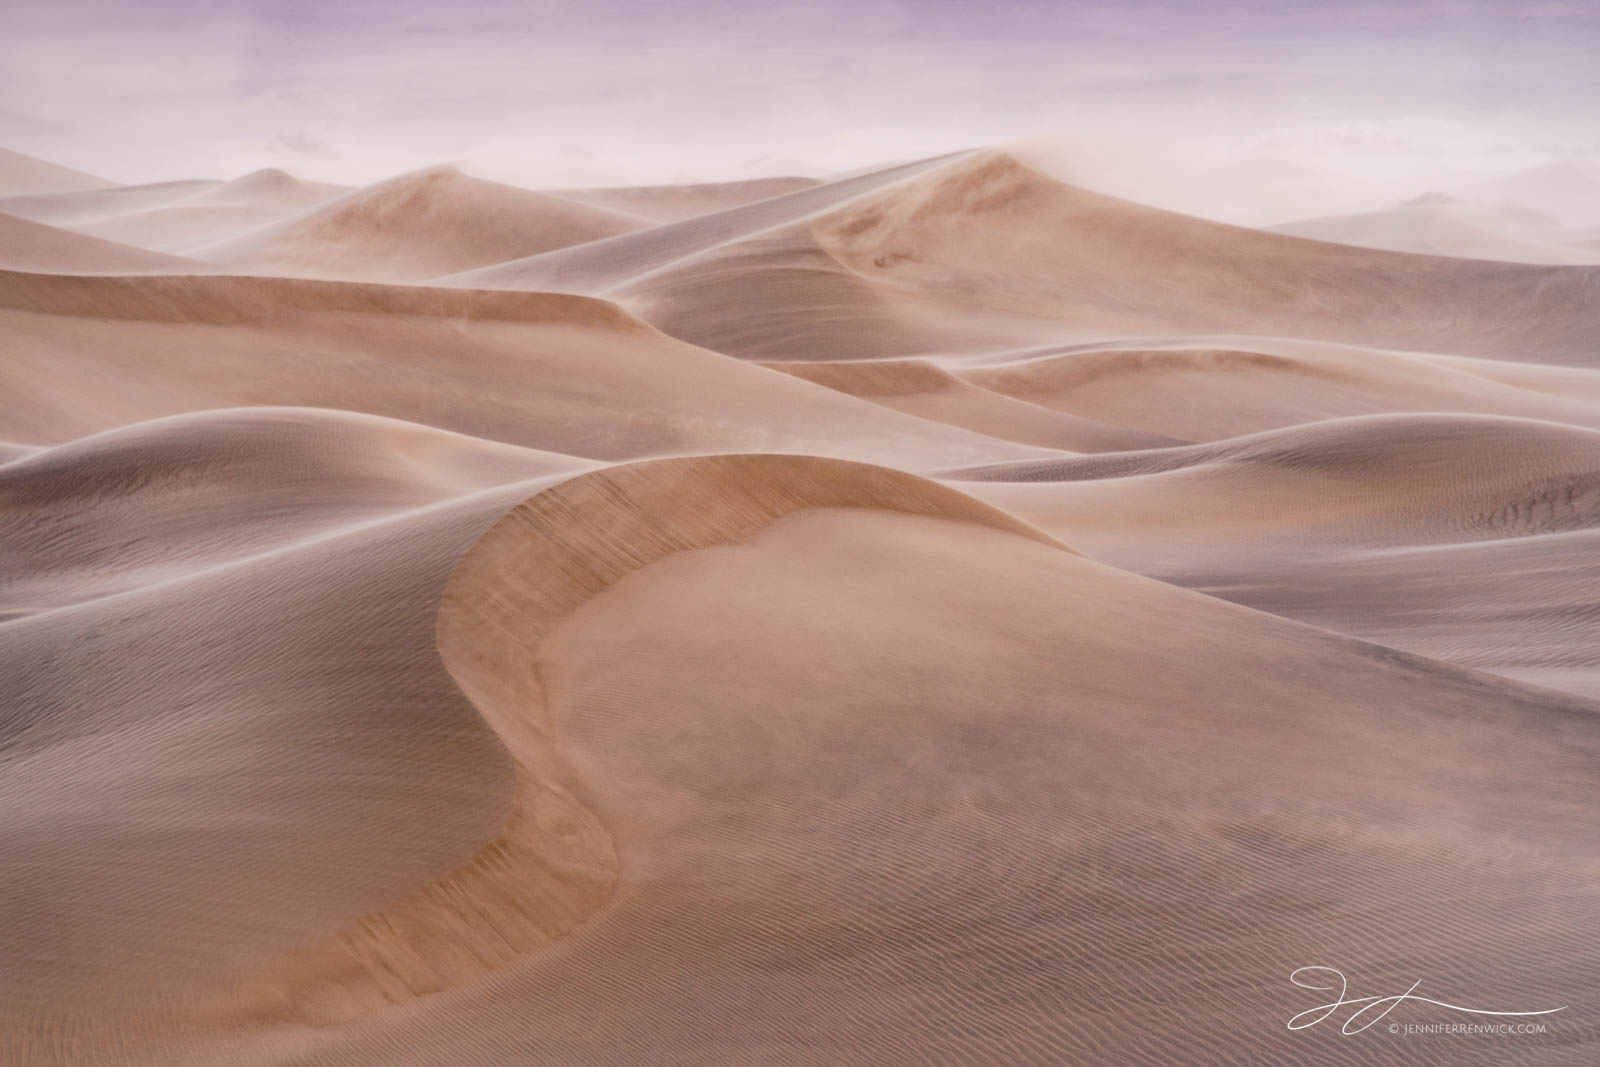 Sand dunes are a mysterious and mystical place to be during a windstorm. The blowing sand highlighted by light dances around...